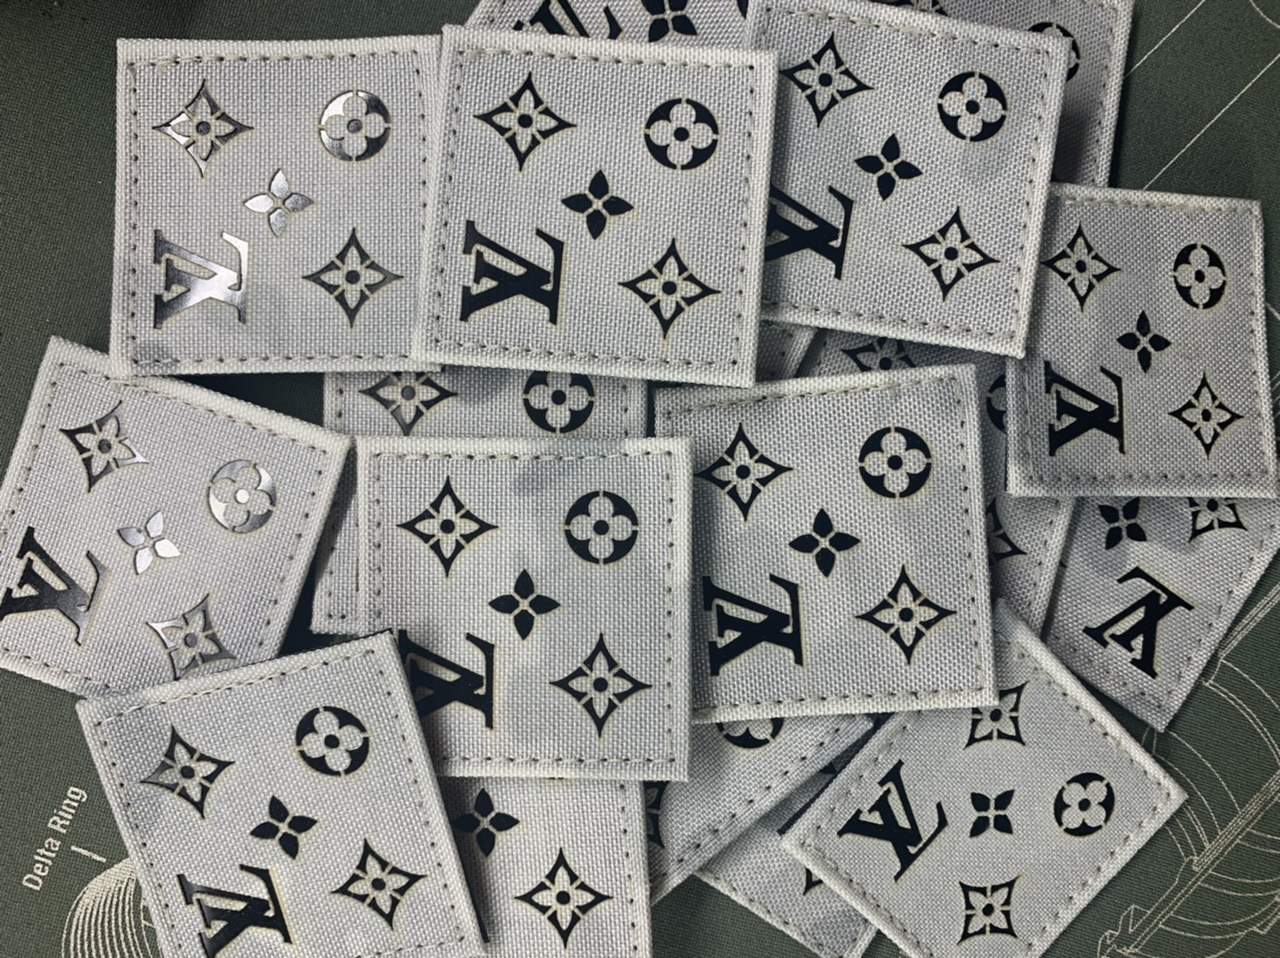 Louis Vuitton Monogram Patches Collection From Fall 2018 - Spotted